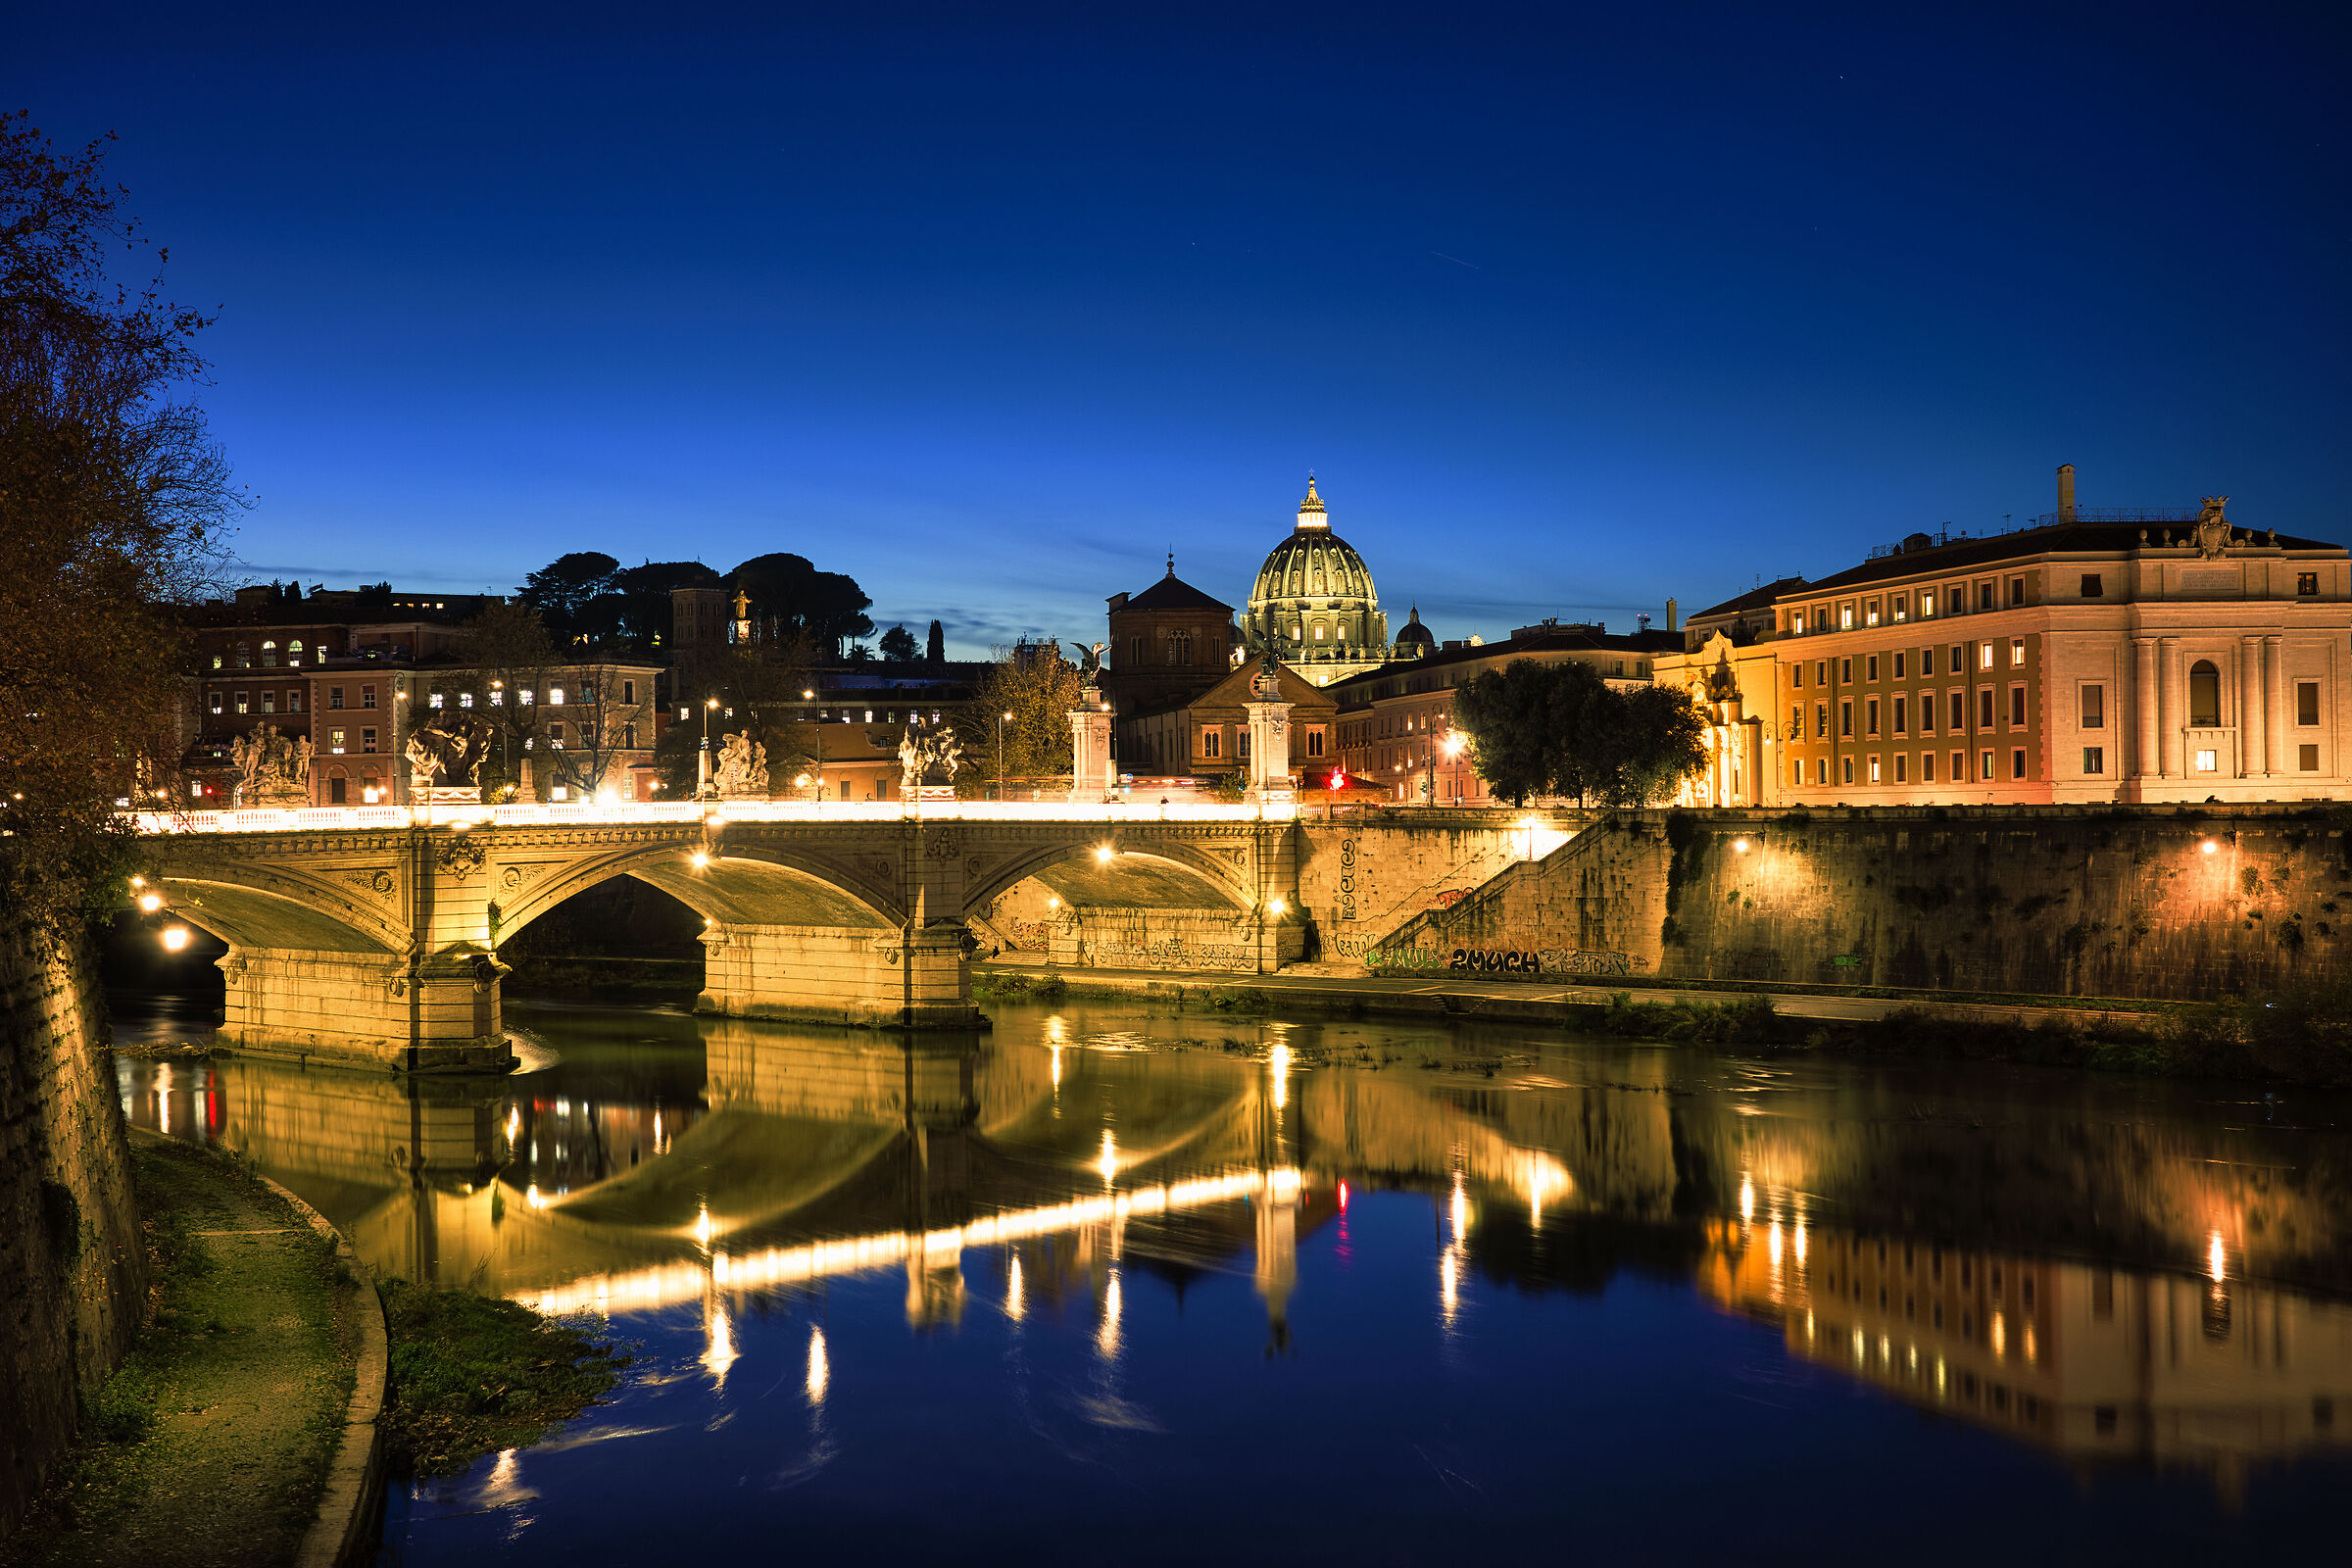 THE TIBER FROM PONTE SANT'ANGELO...